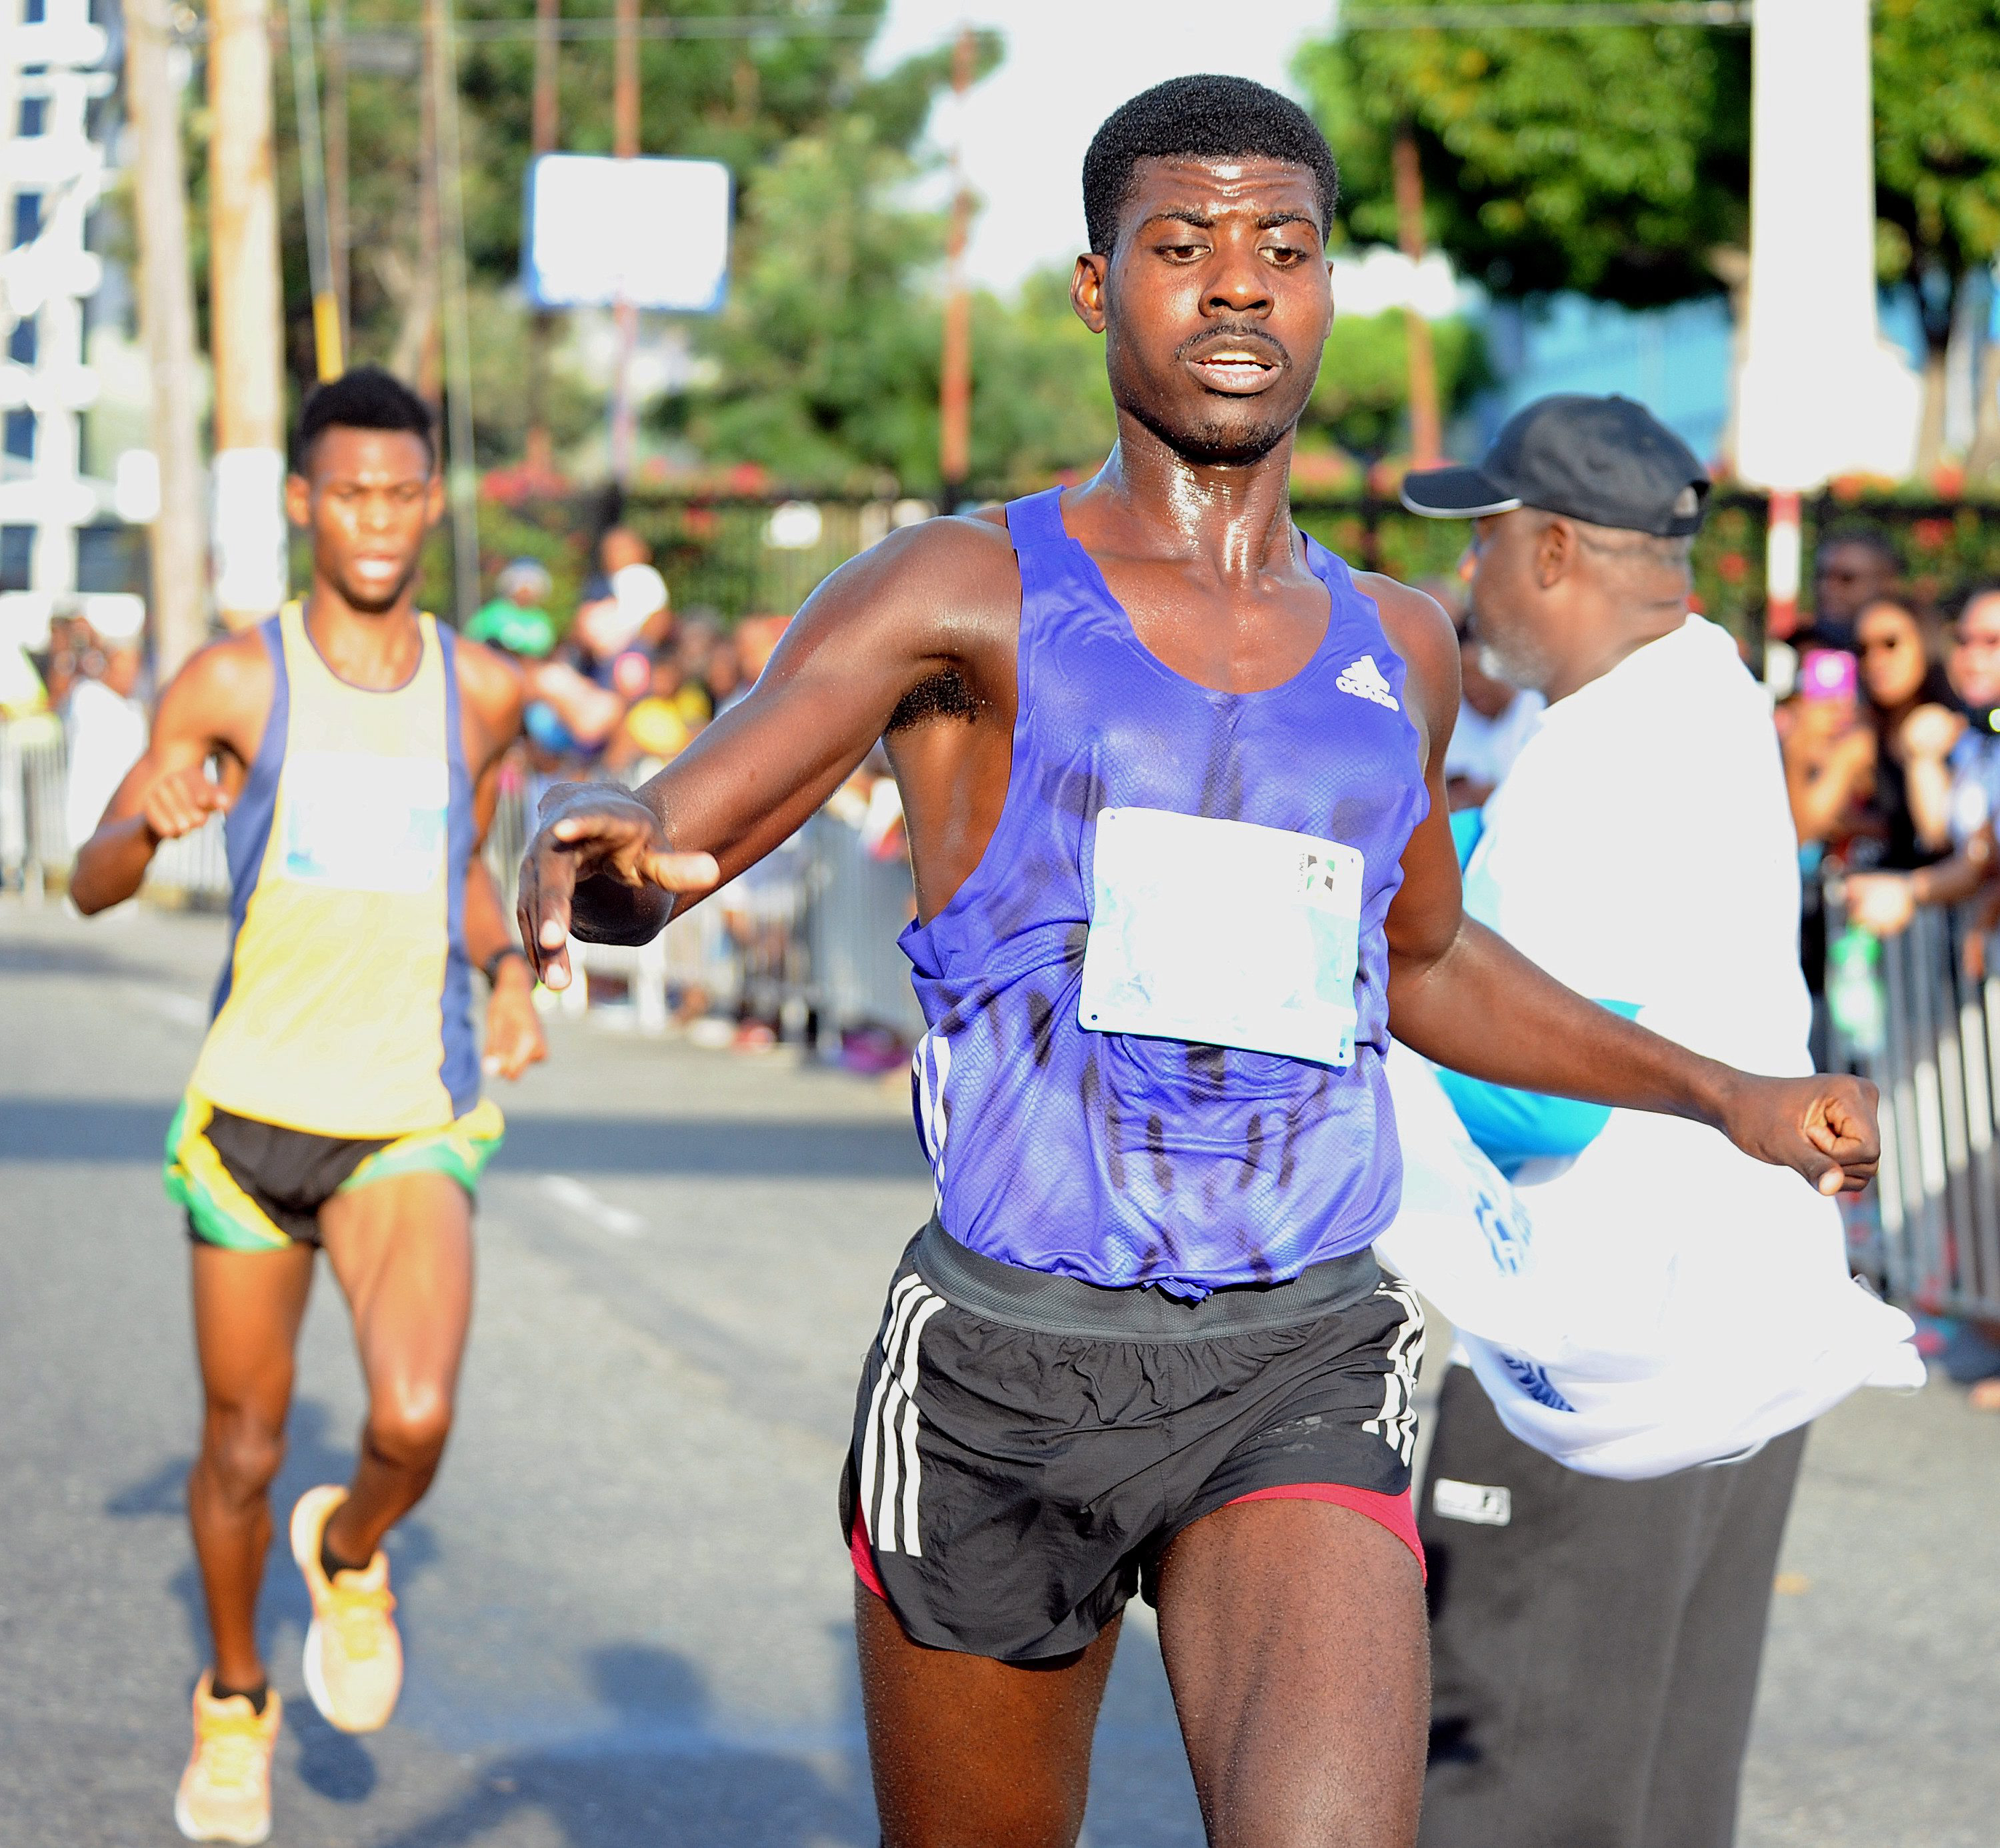 Jamaica Cross Country Trials on Wednesday